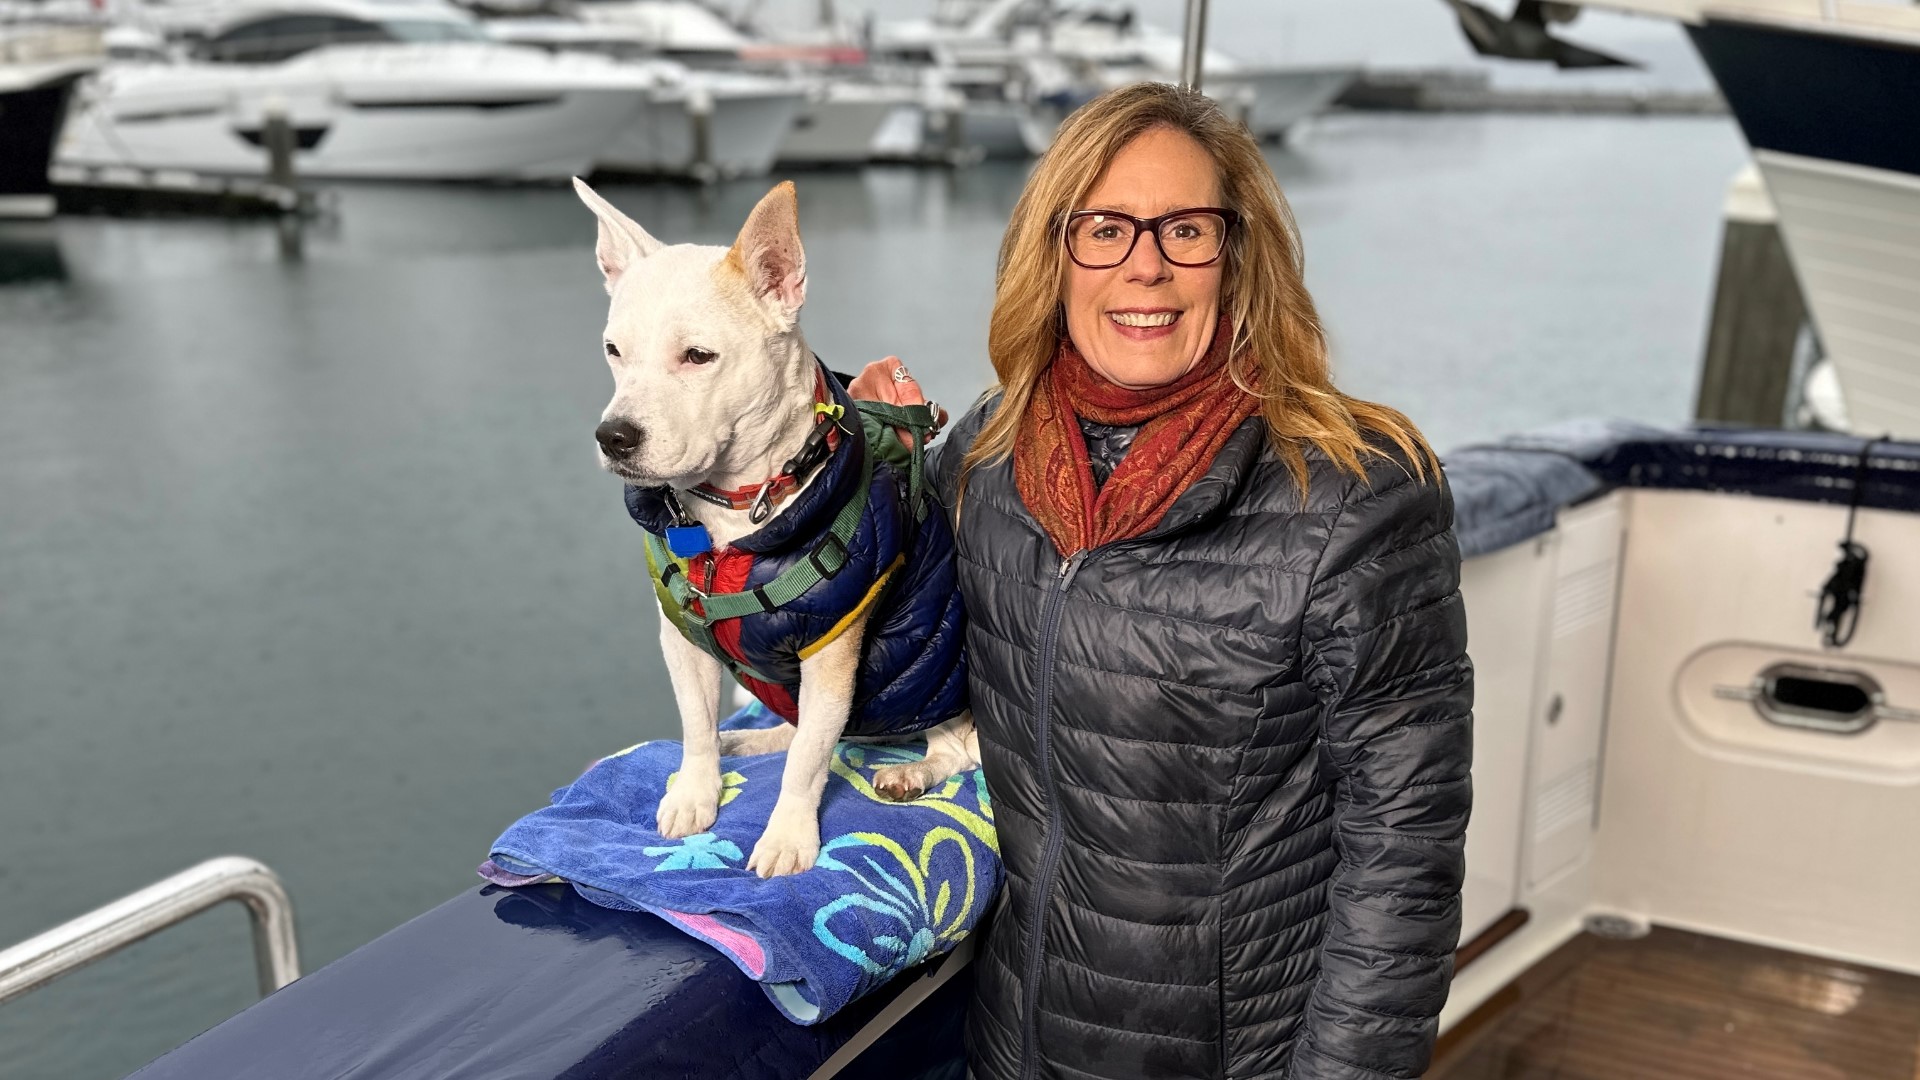 The rescue dog helps sniff out whale scat for researchers. She'll appear at the Seattle Boat Show this week.  #k5evening